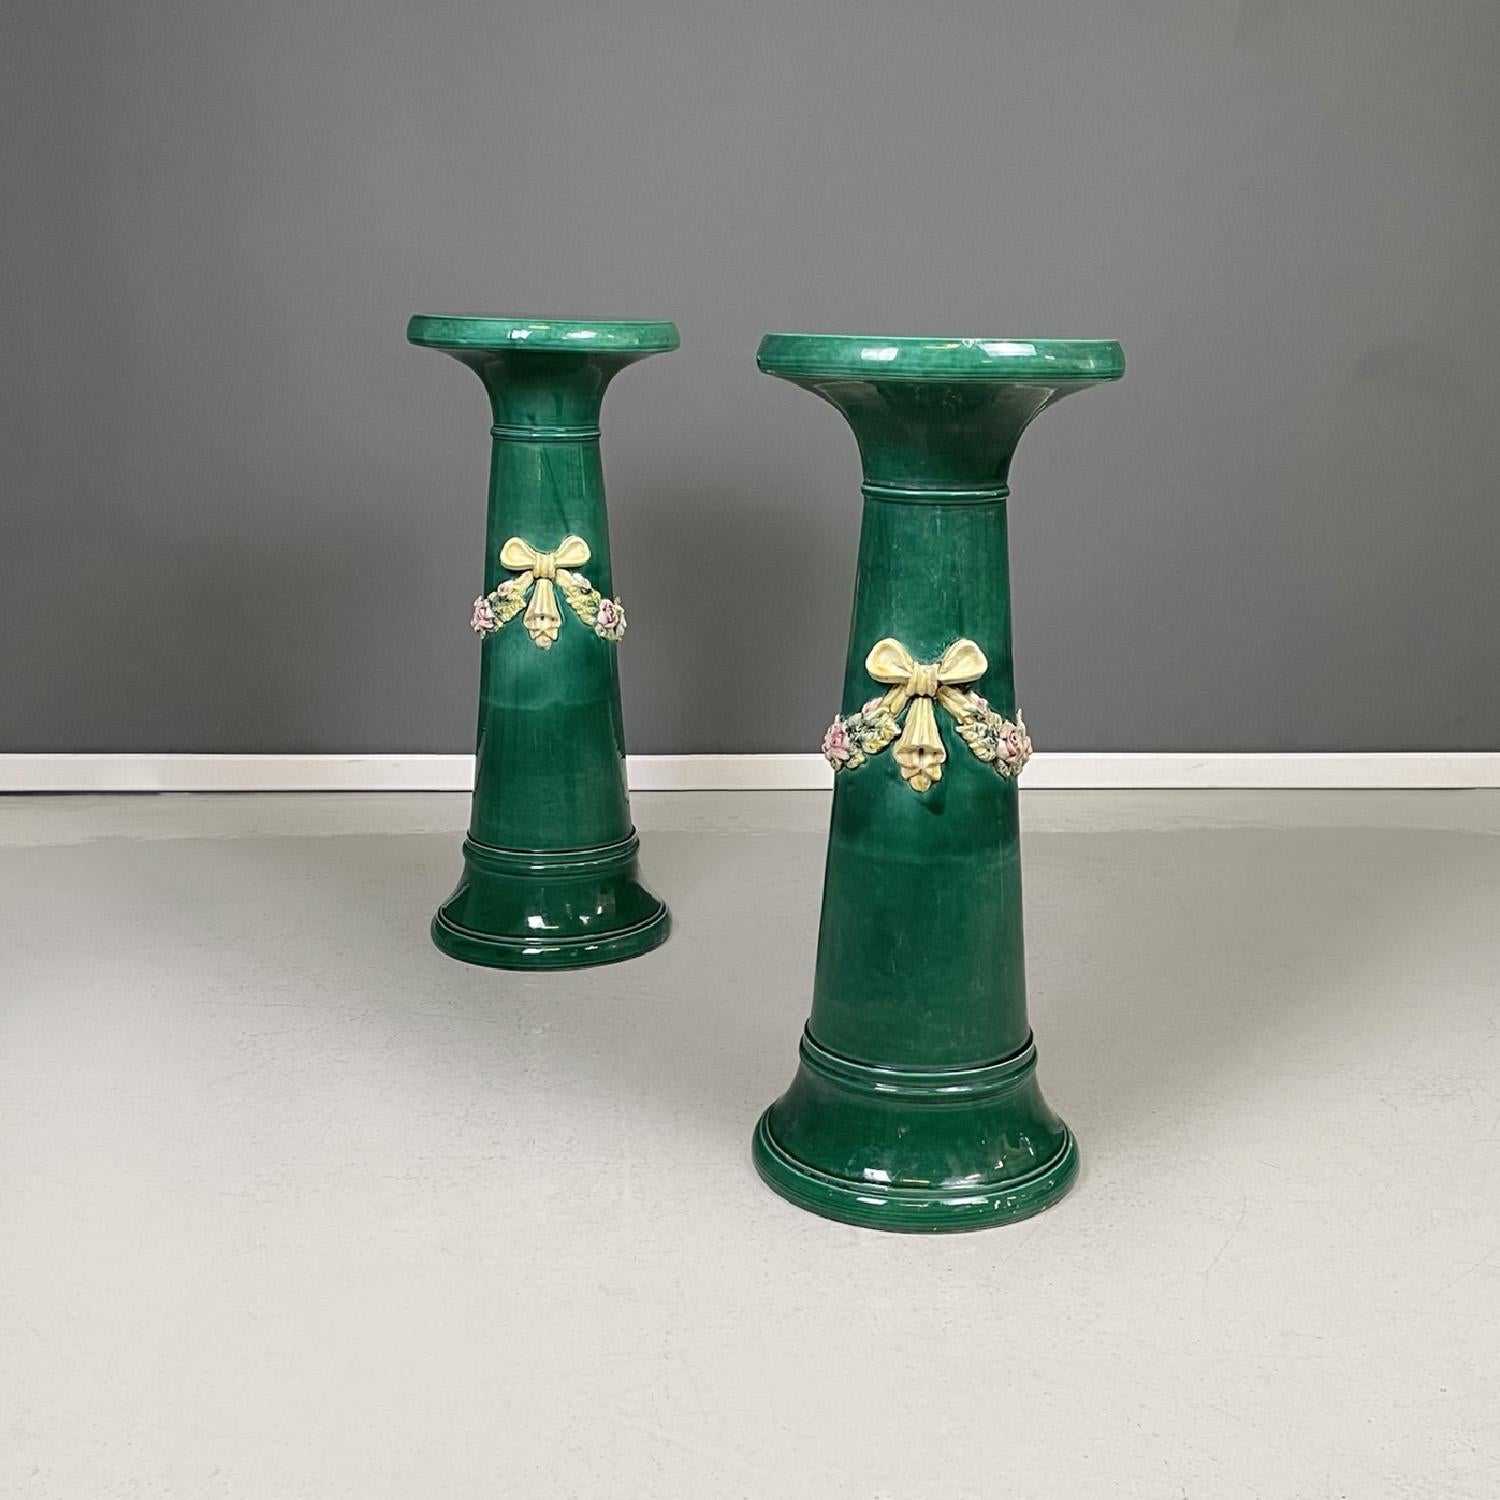 Italian imperial style green ceramic columns pedestals bows and flowers, 1930s
Pair of pedestals with a round base. The tapered structure narrows at the top and then widens at the base. The structure is in green ceramic with a glossy finish, in the